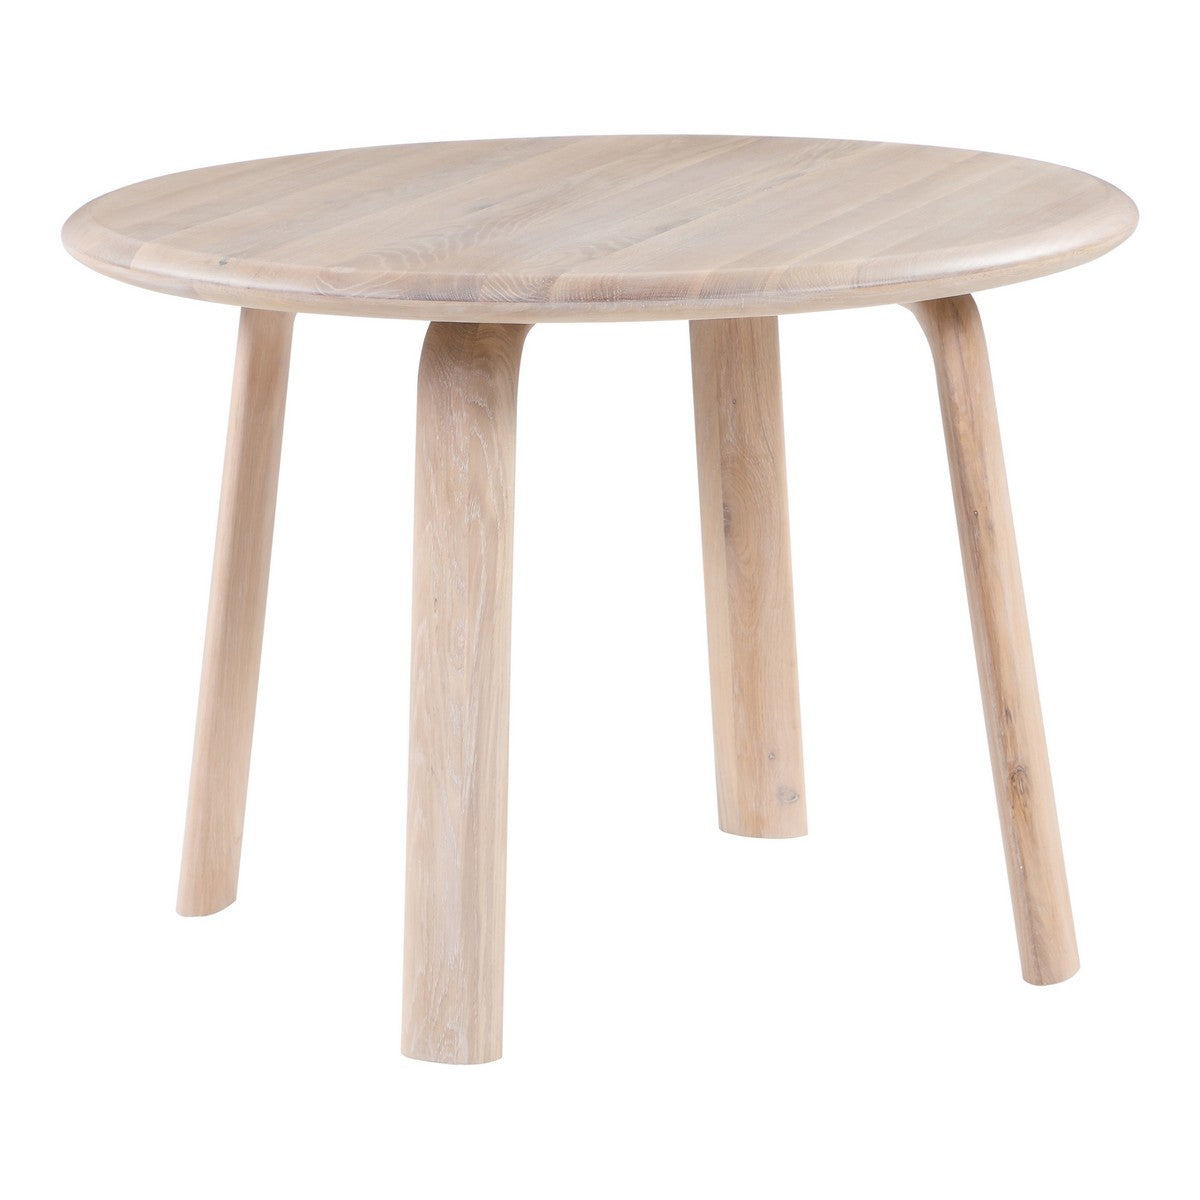 Moe's Home Collection Malibu Round Dining Table White Oak - BC-1047-18 - Moe's Home Collection - Dining Tables - Minimal And Modern - 1